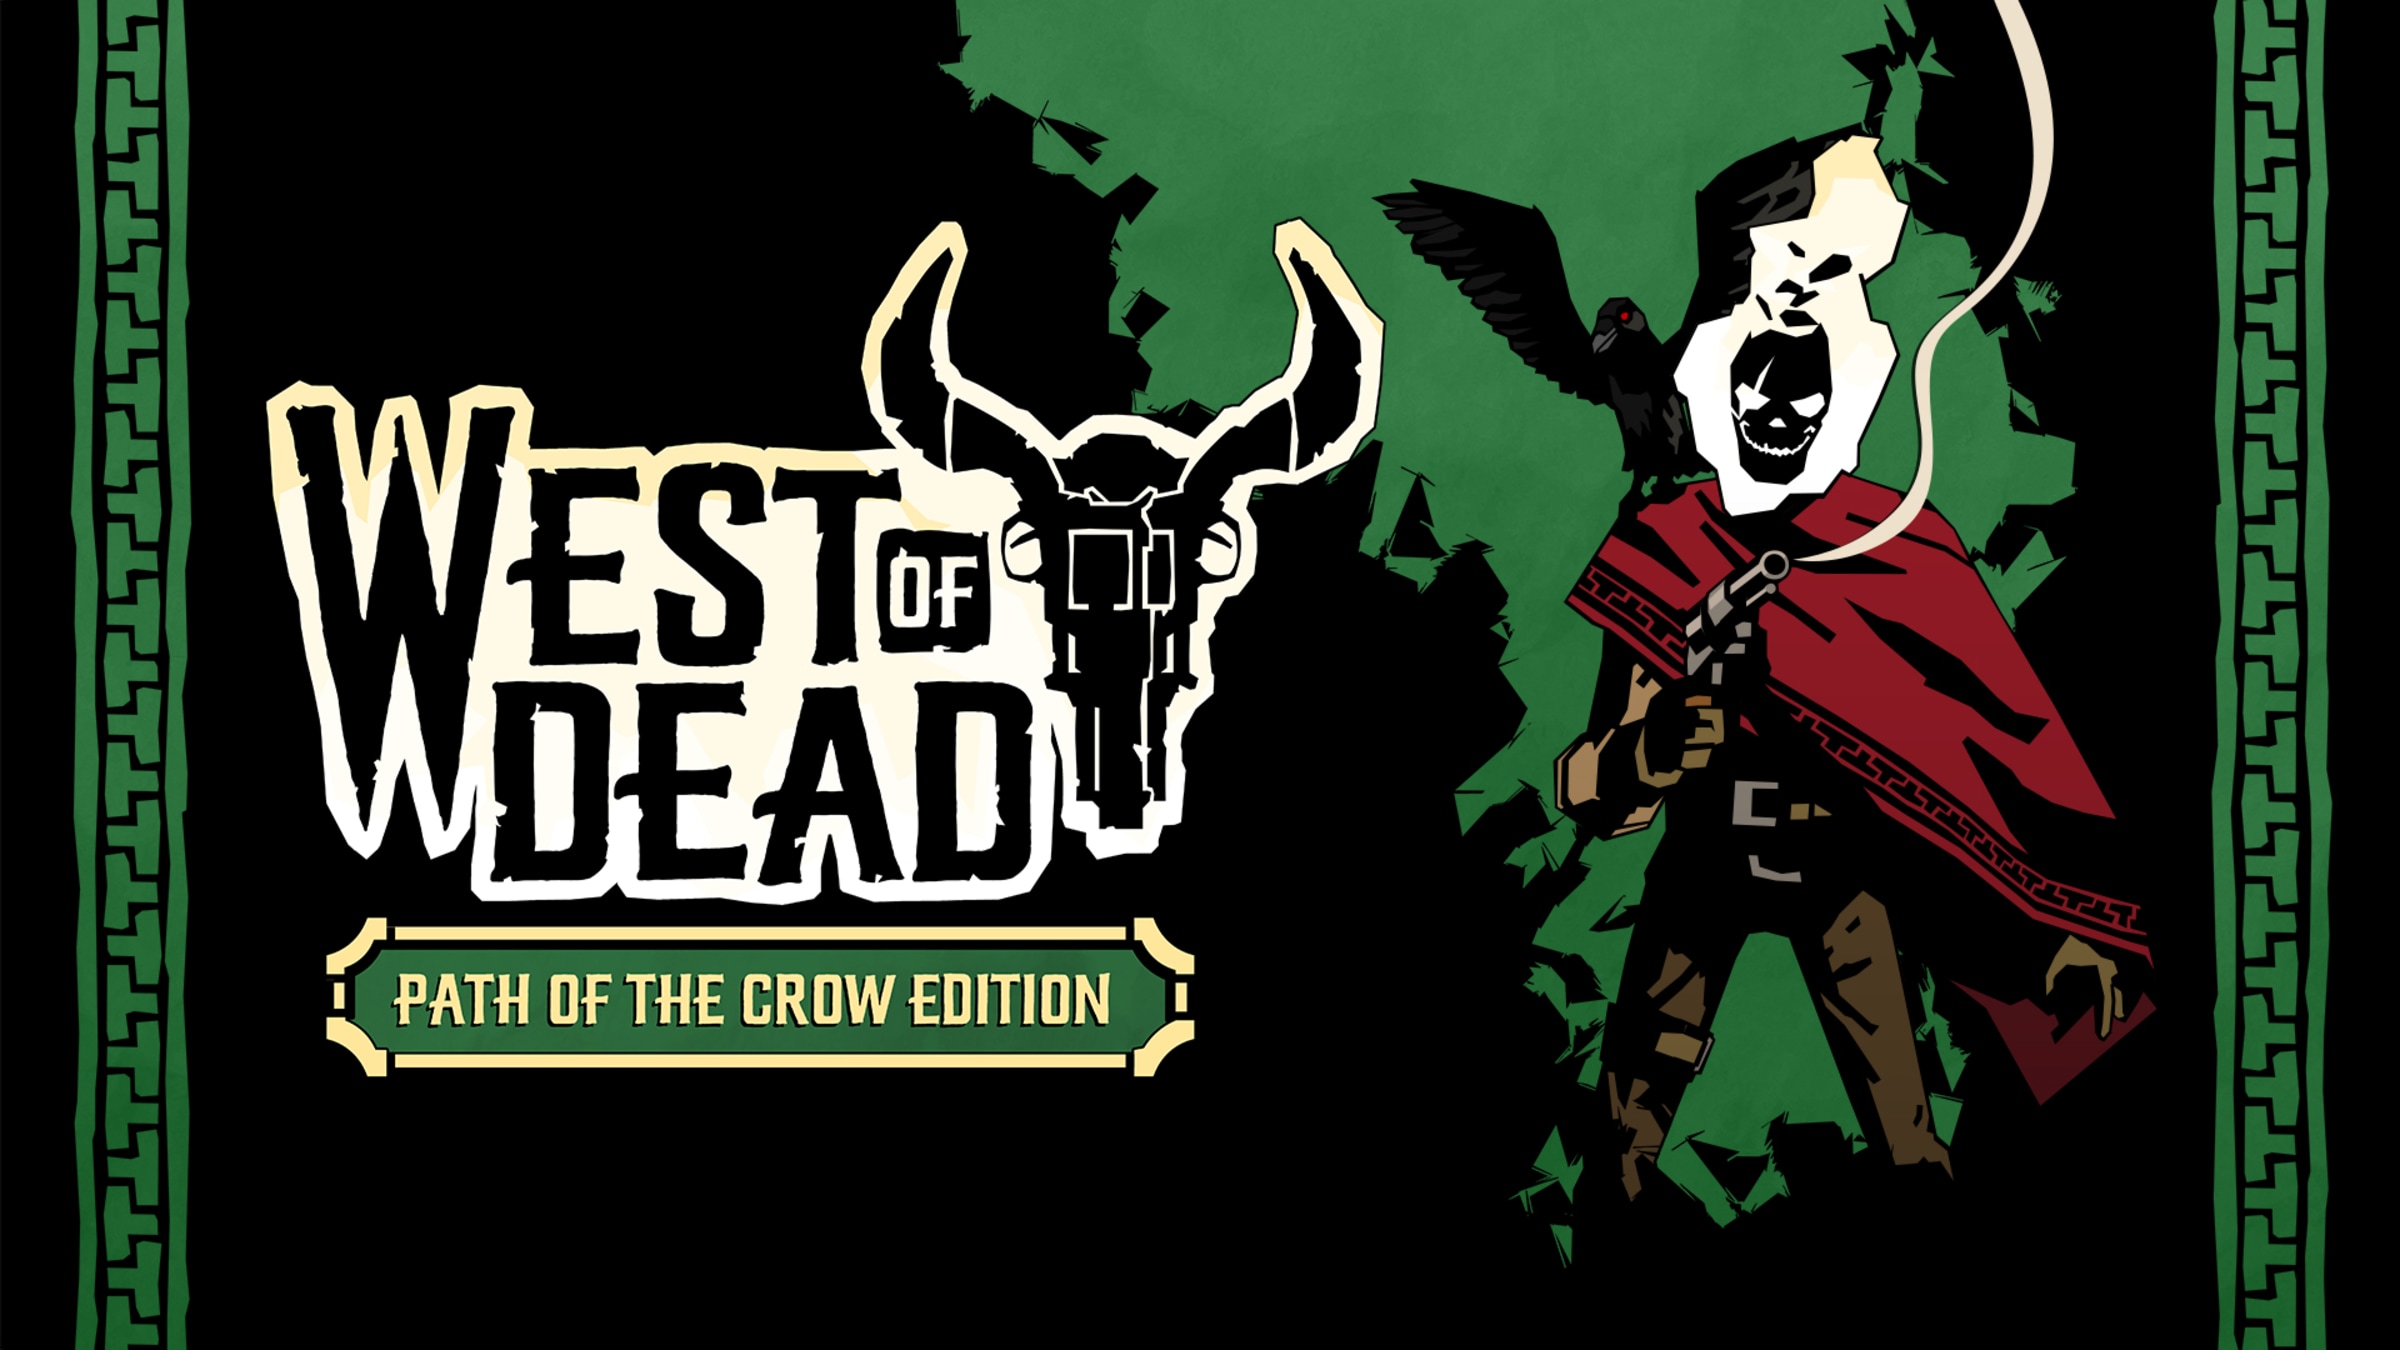 West of Dead: Path of the Crow Deluxe Edition